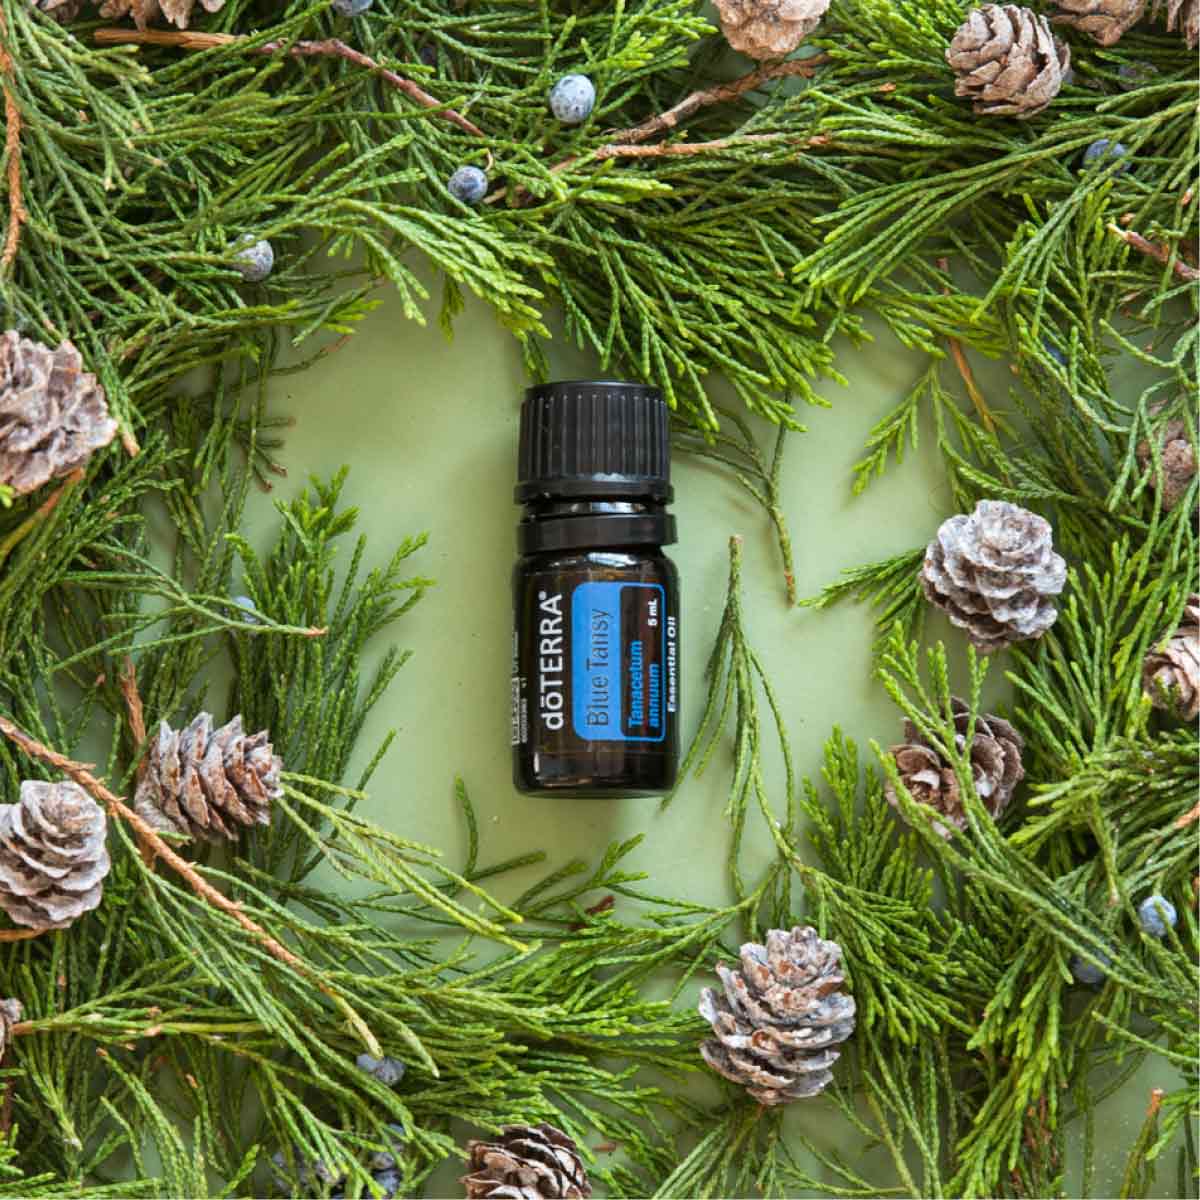 What does Blue Tansy essential oil smell like? The unique aroma of Blue Tansy oil is fruity, balsamic, and mellow.